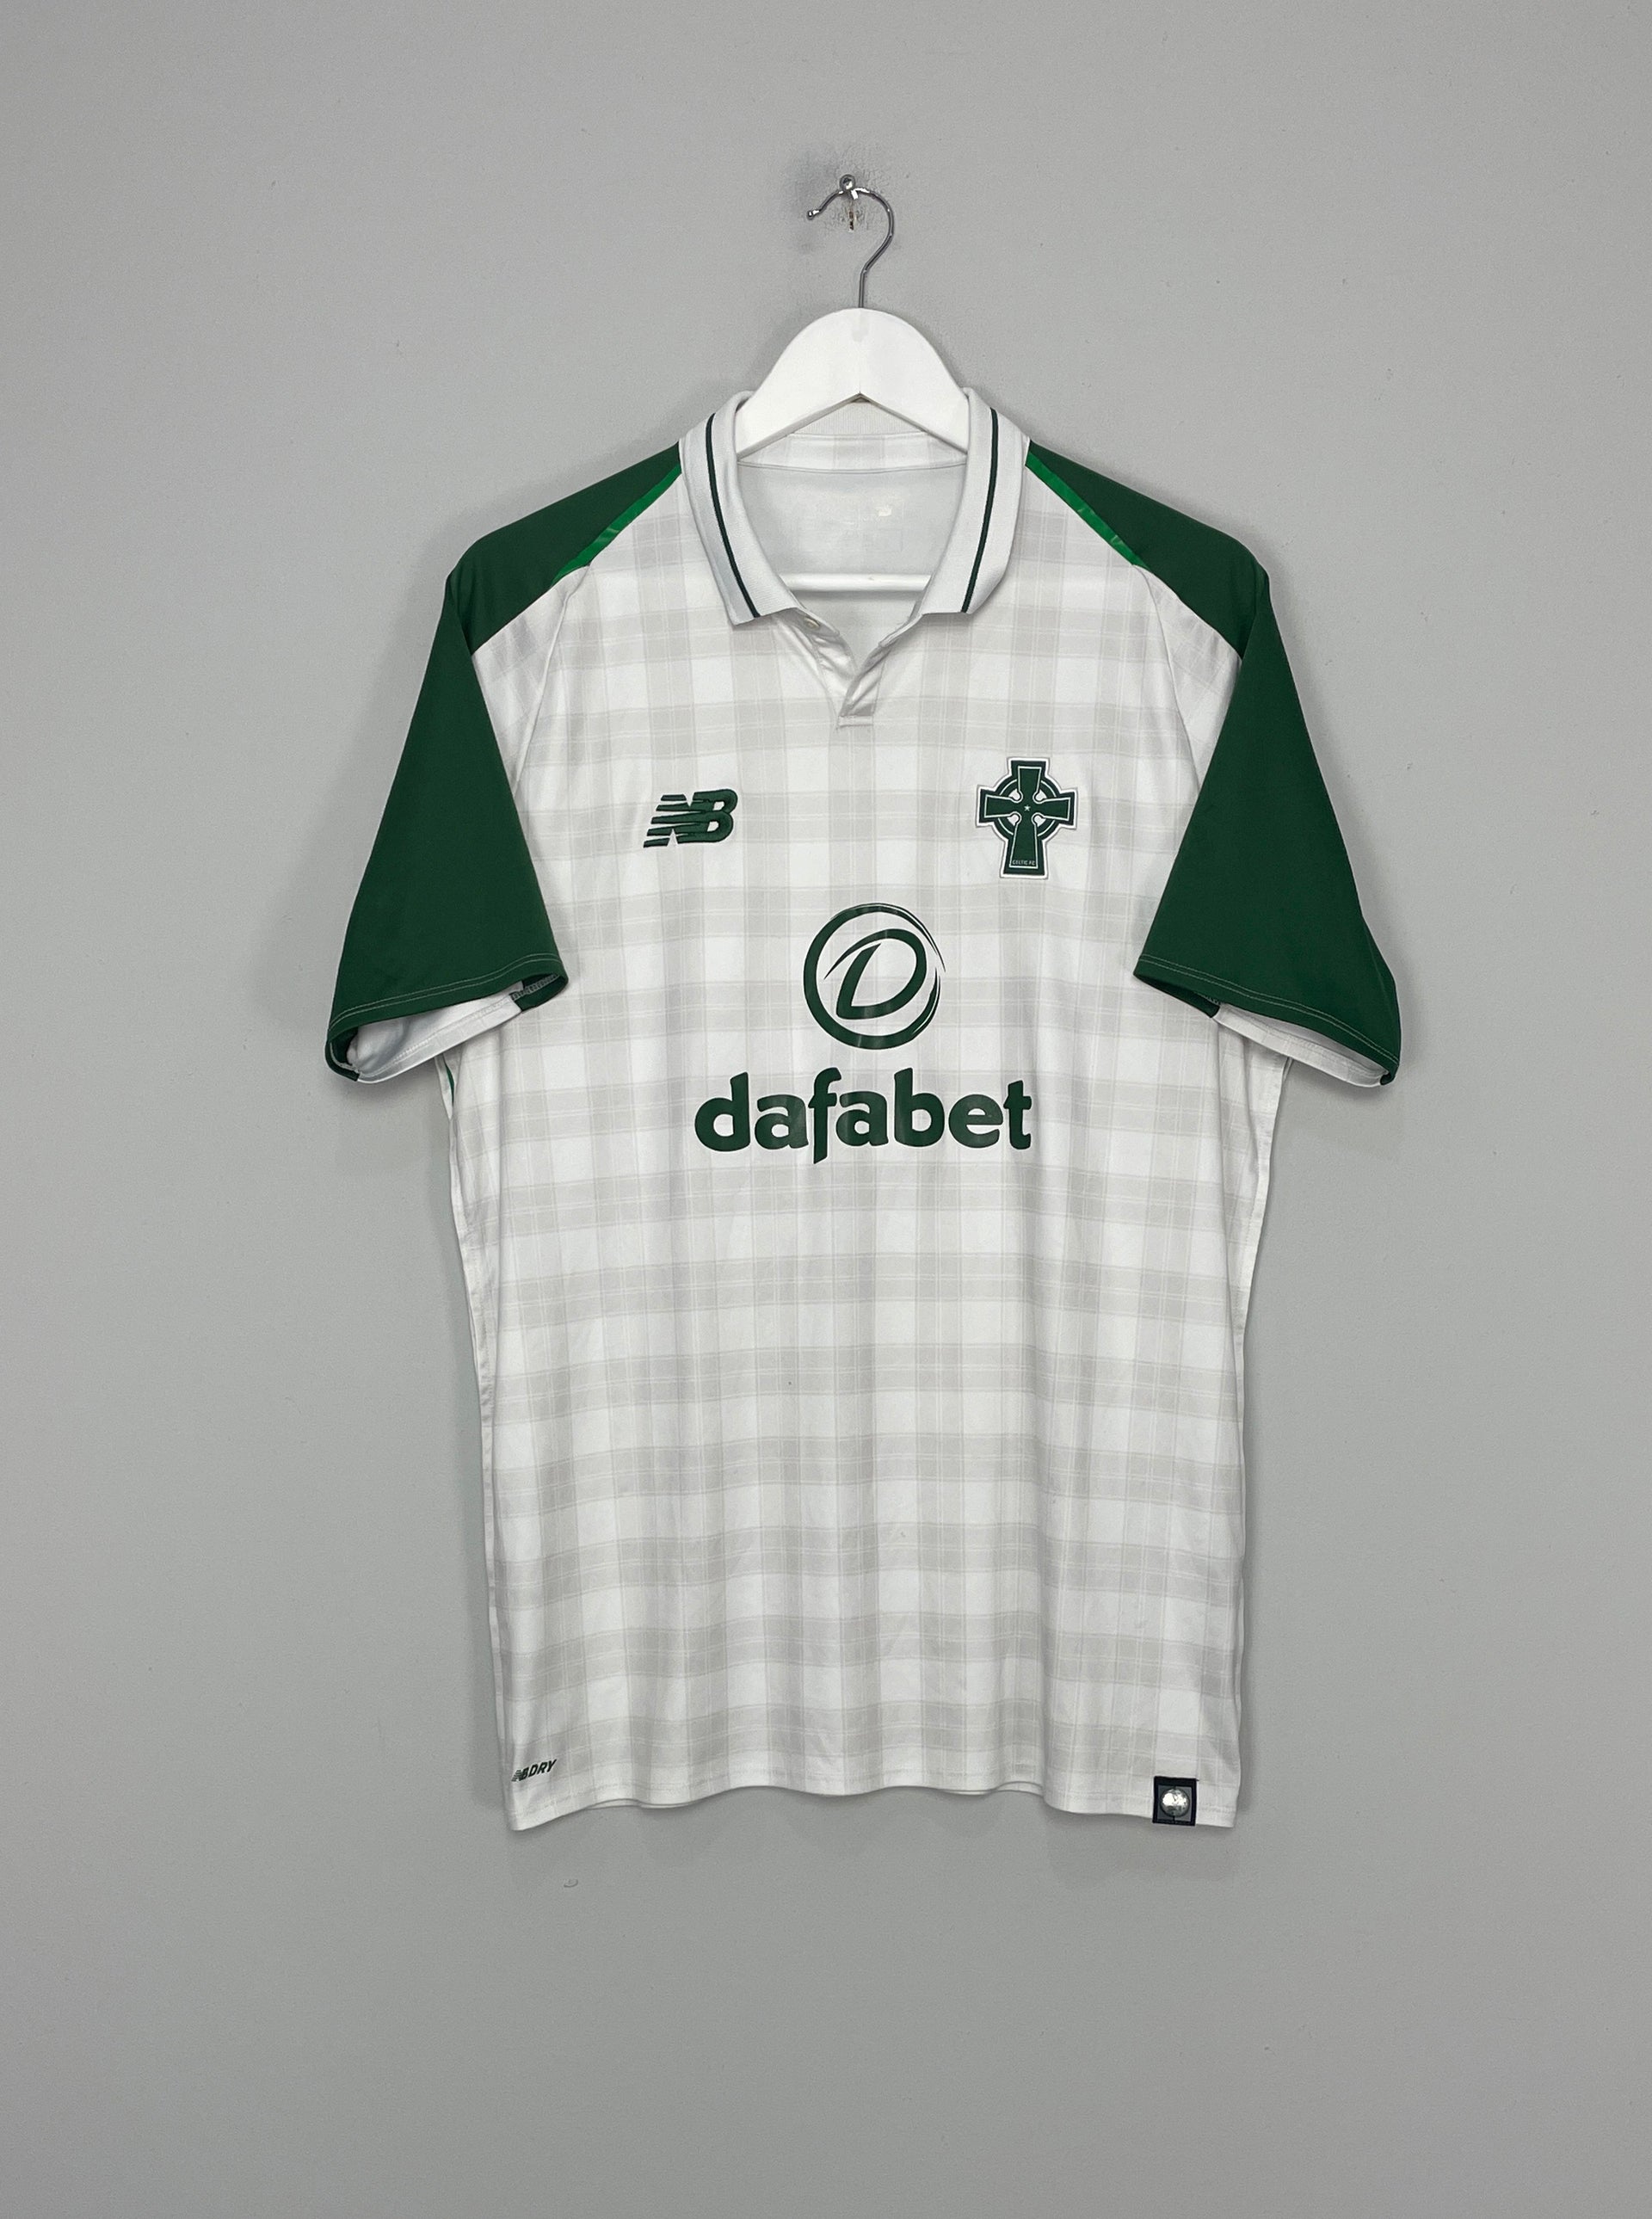 CELTIC 2018/19 AWAY SHIRT REVIEW, AN INSTANT CLASSIC